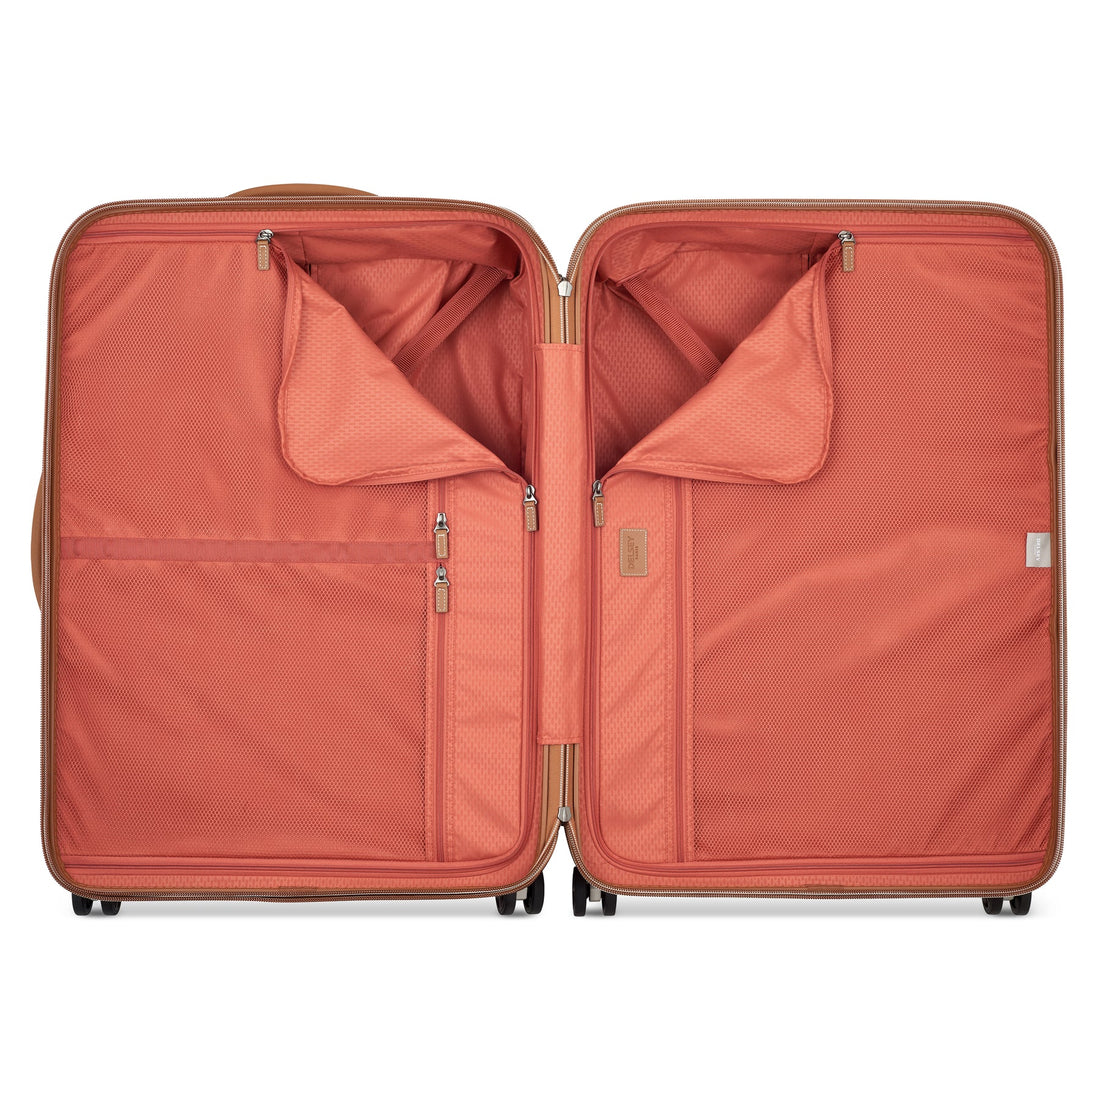 Chatelet Air 2.0 - 2 Piece Travel Sets